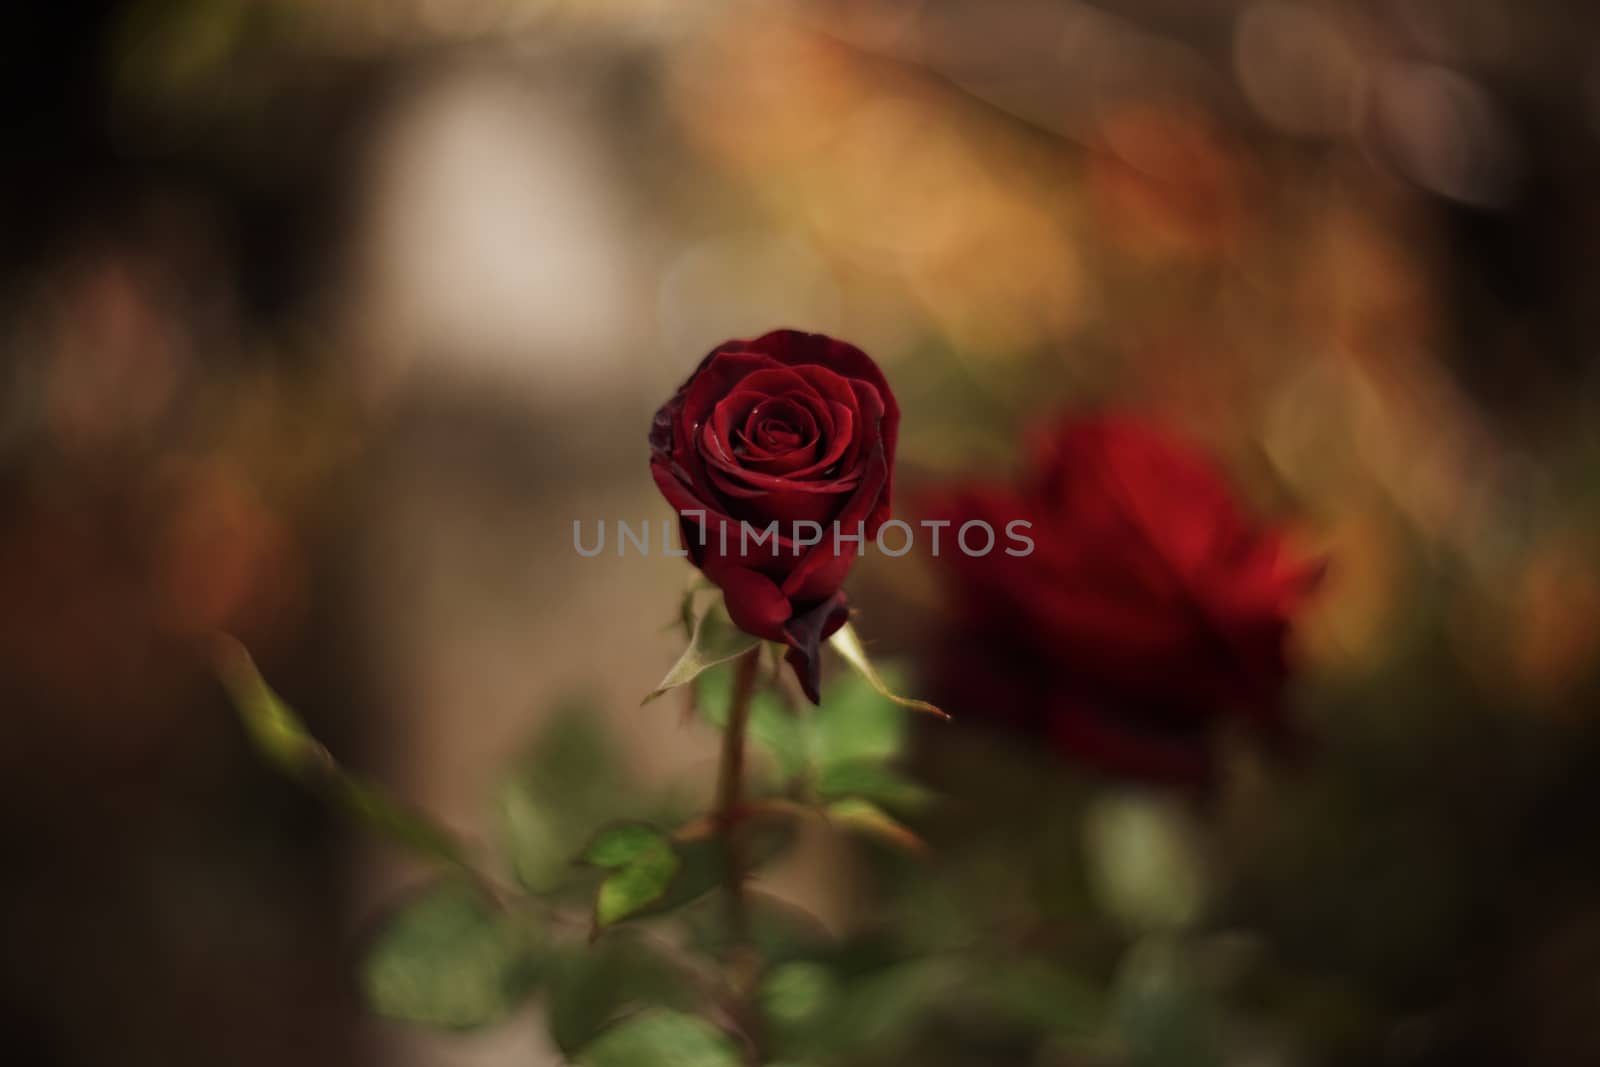 Perfect and beautiful hue red rose in garden. Close-up view, backgroud is blurred.